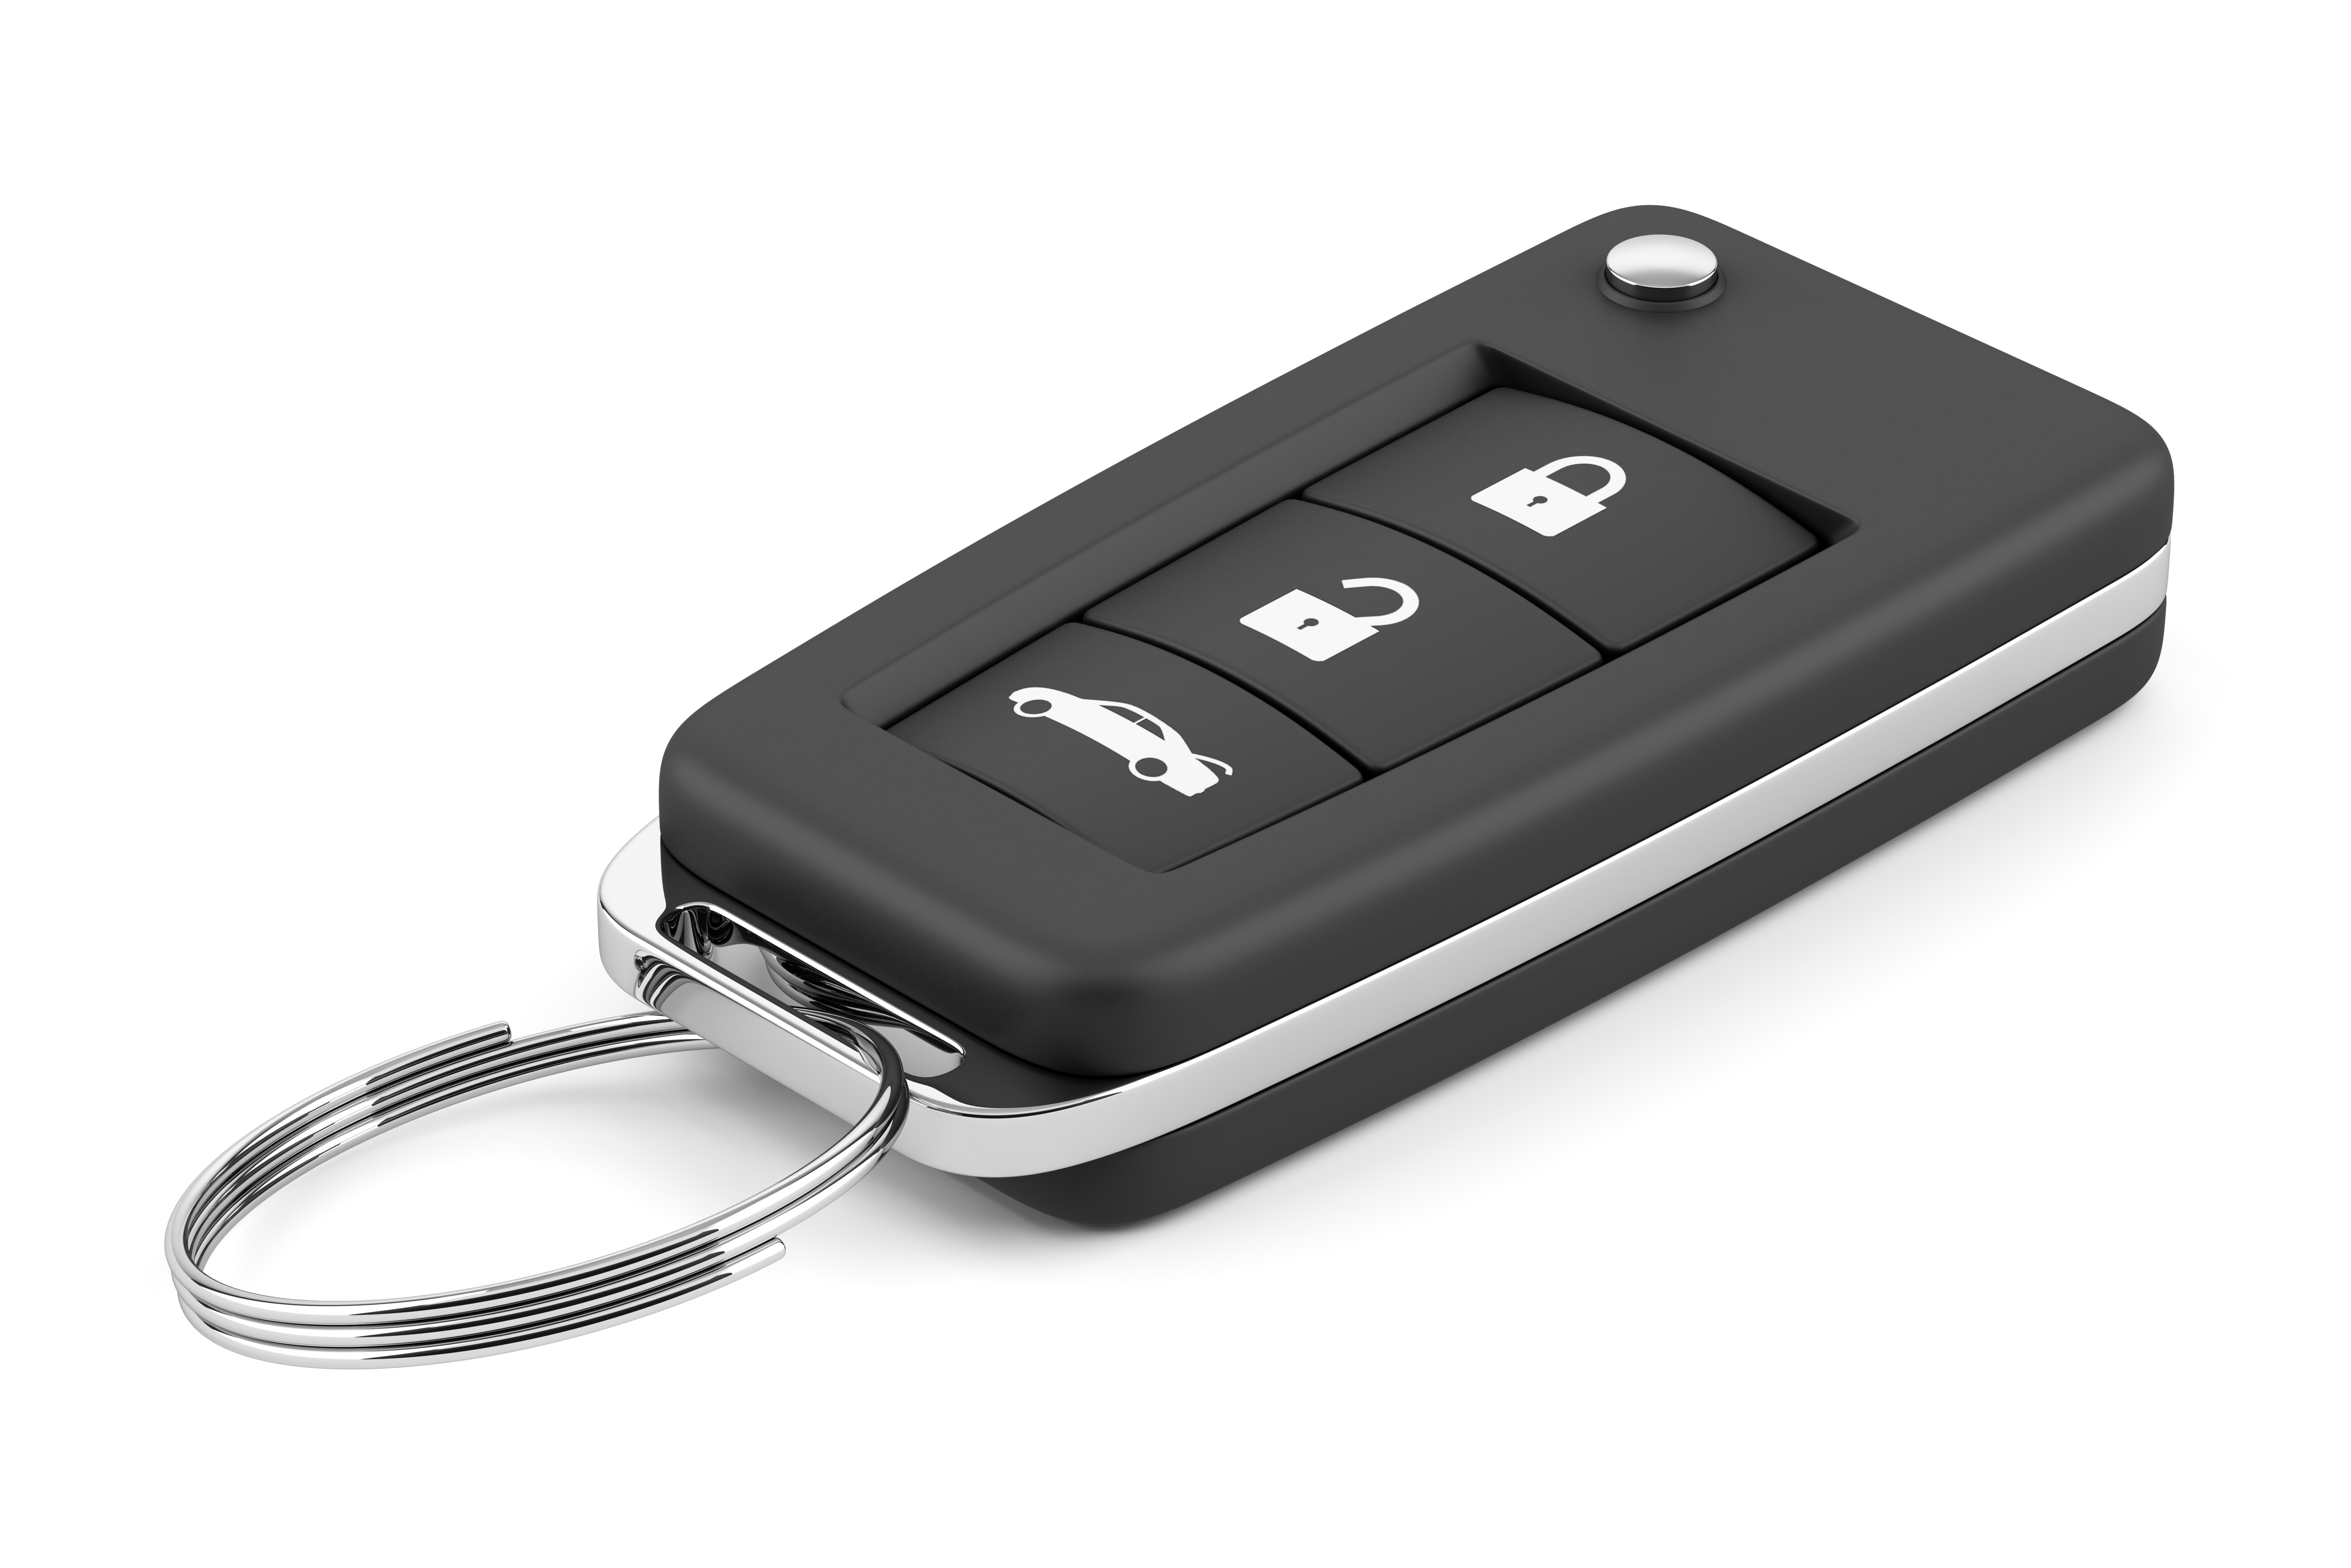 How To Replace Install Battery Car Key Fob Remote Easy Simple 